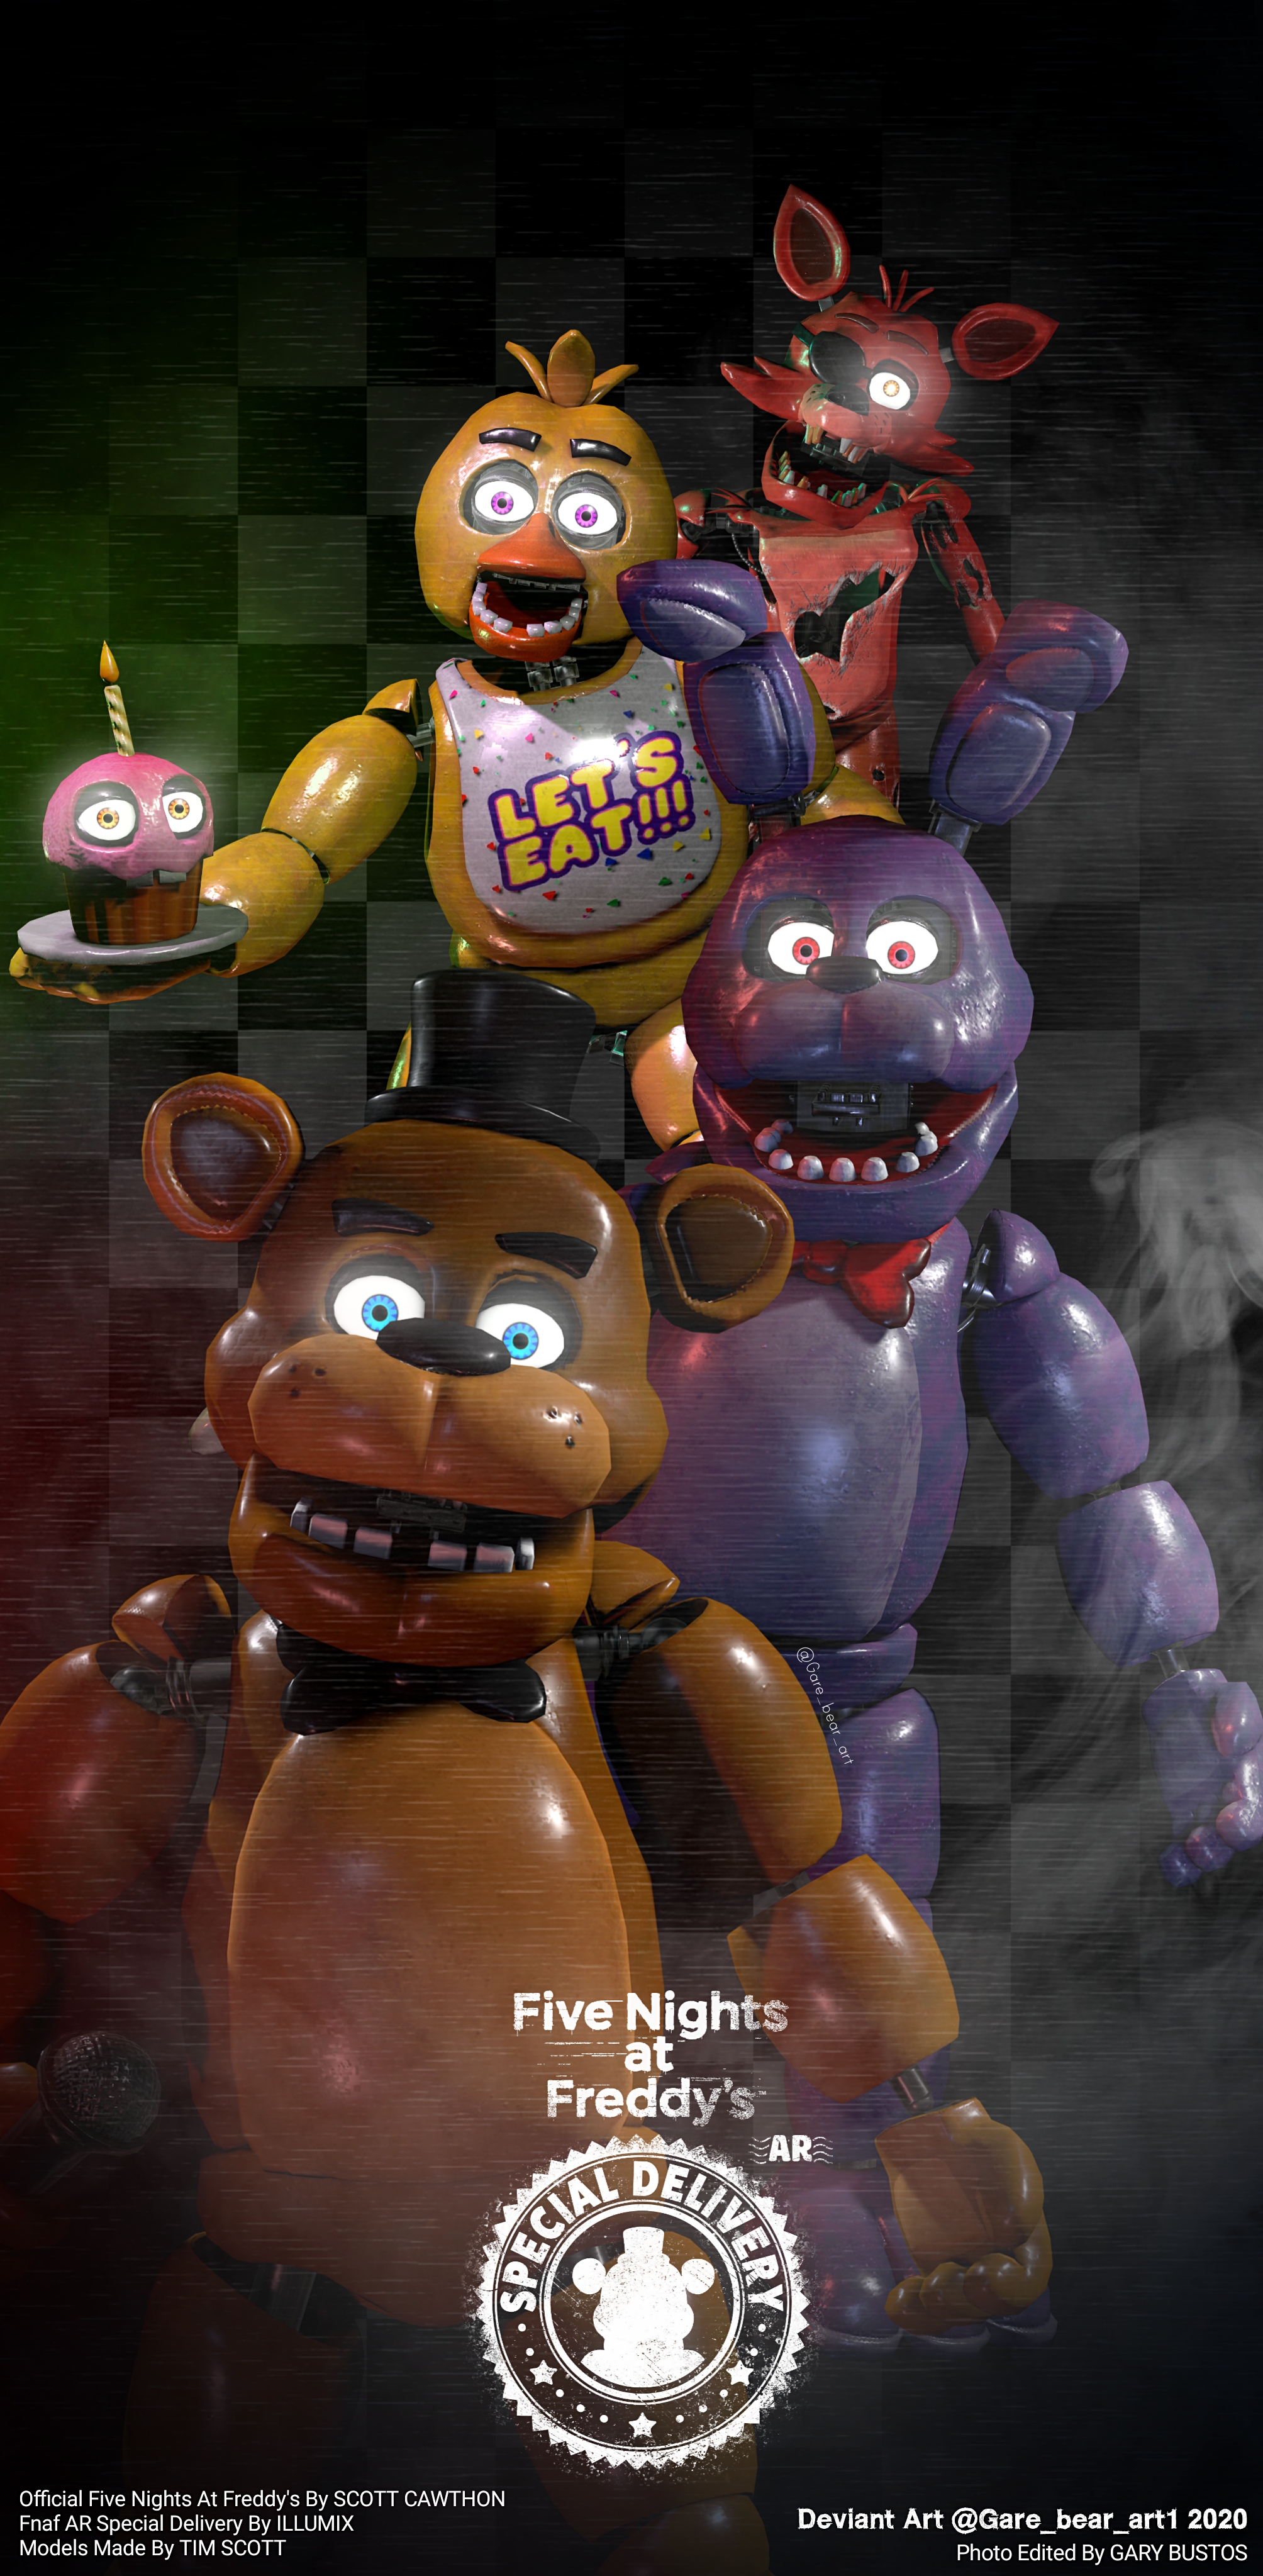 FNAF AR Special Delivery Has Arrived! (Five Nights at Freddys AR - Part 1)  